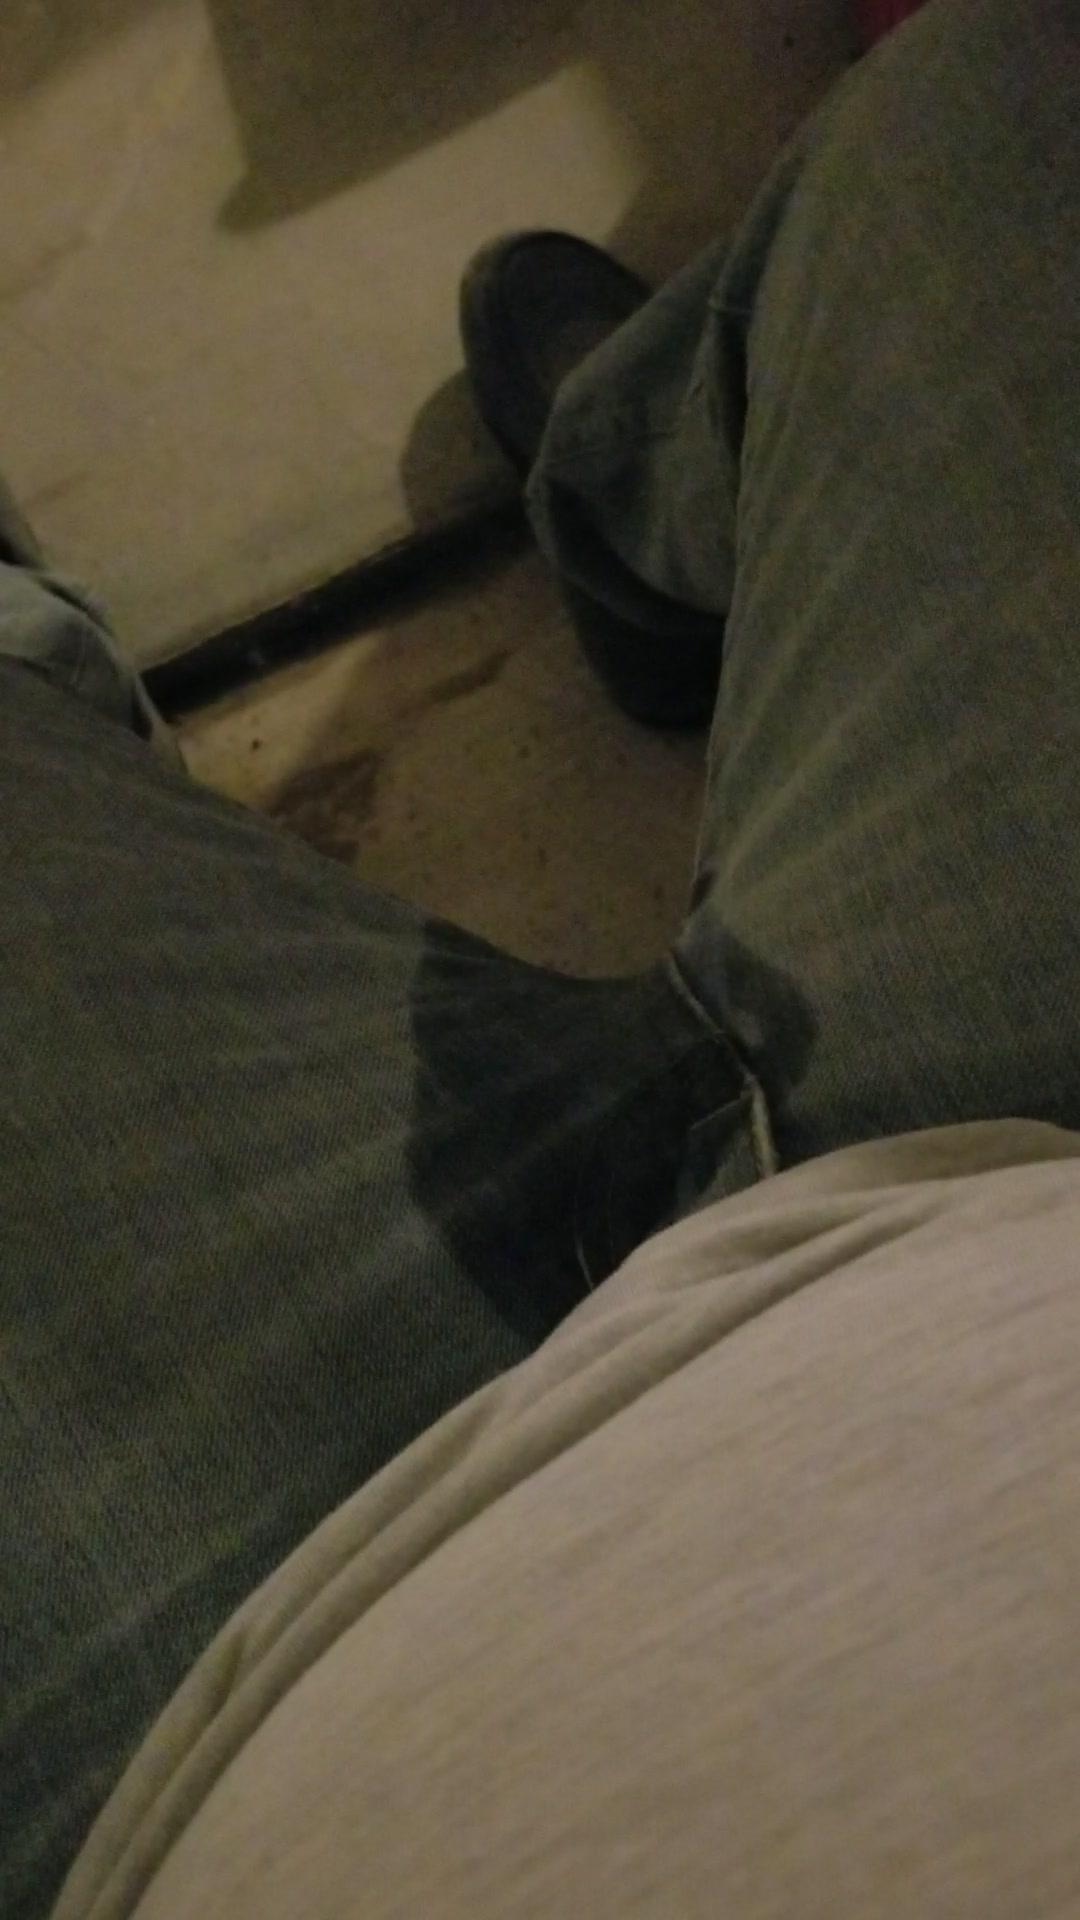 Pissing jeans - video 9